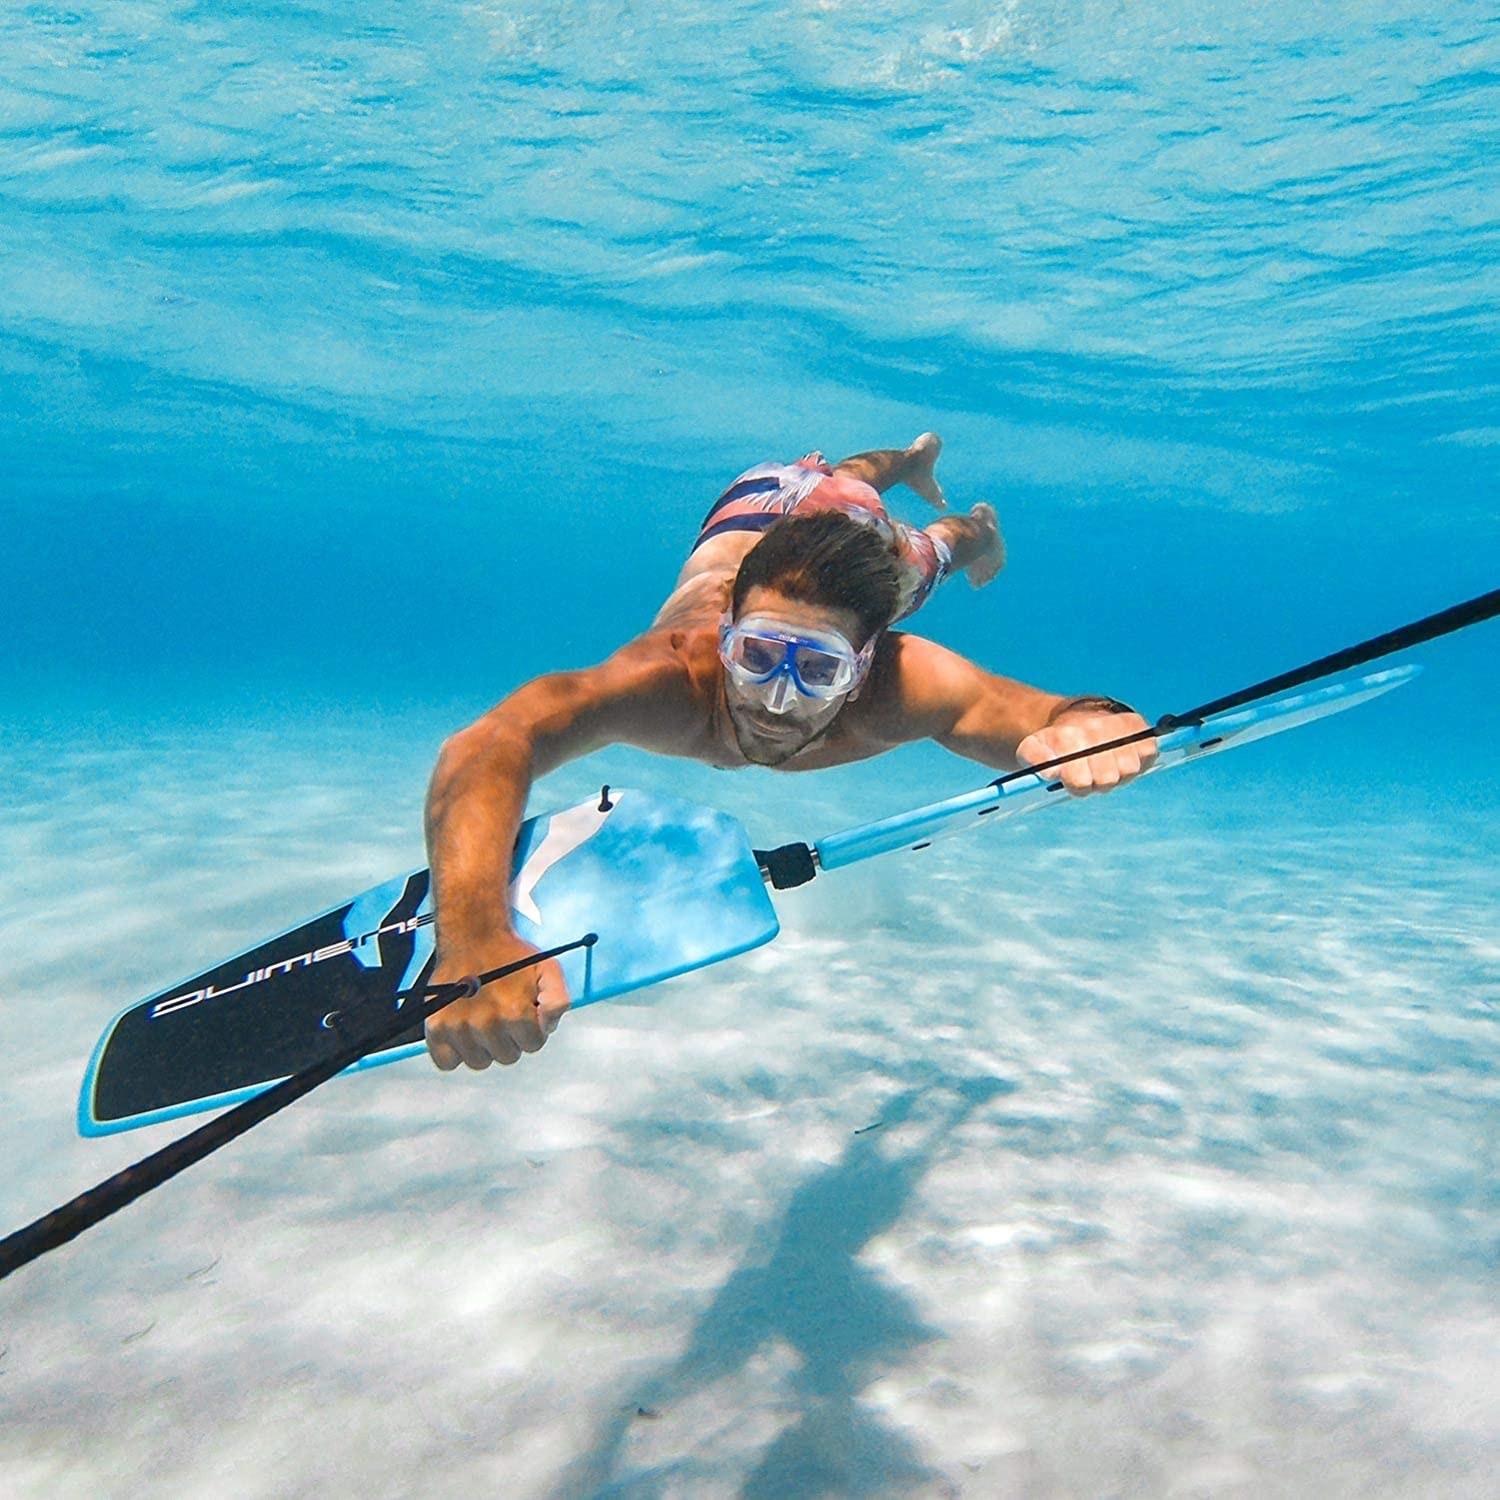 A person being pulled underwater while holding on to the board